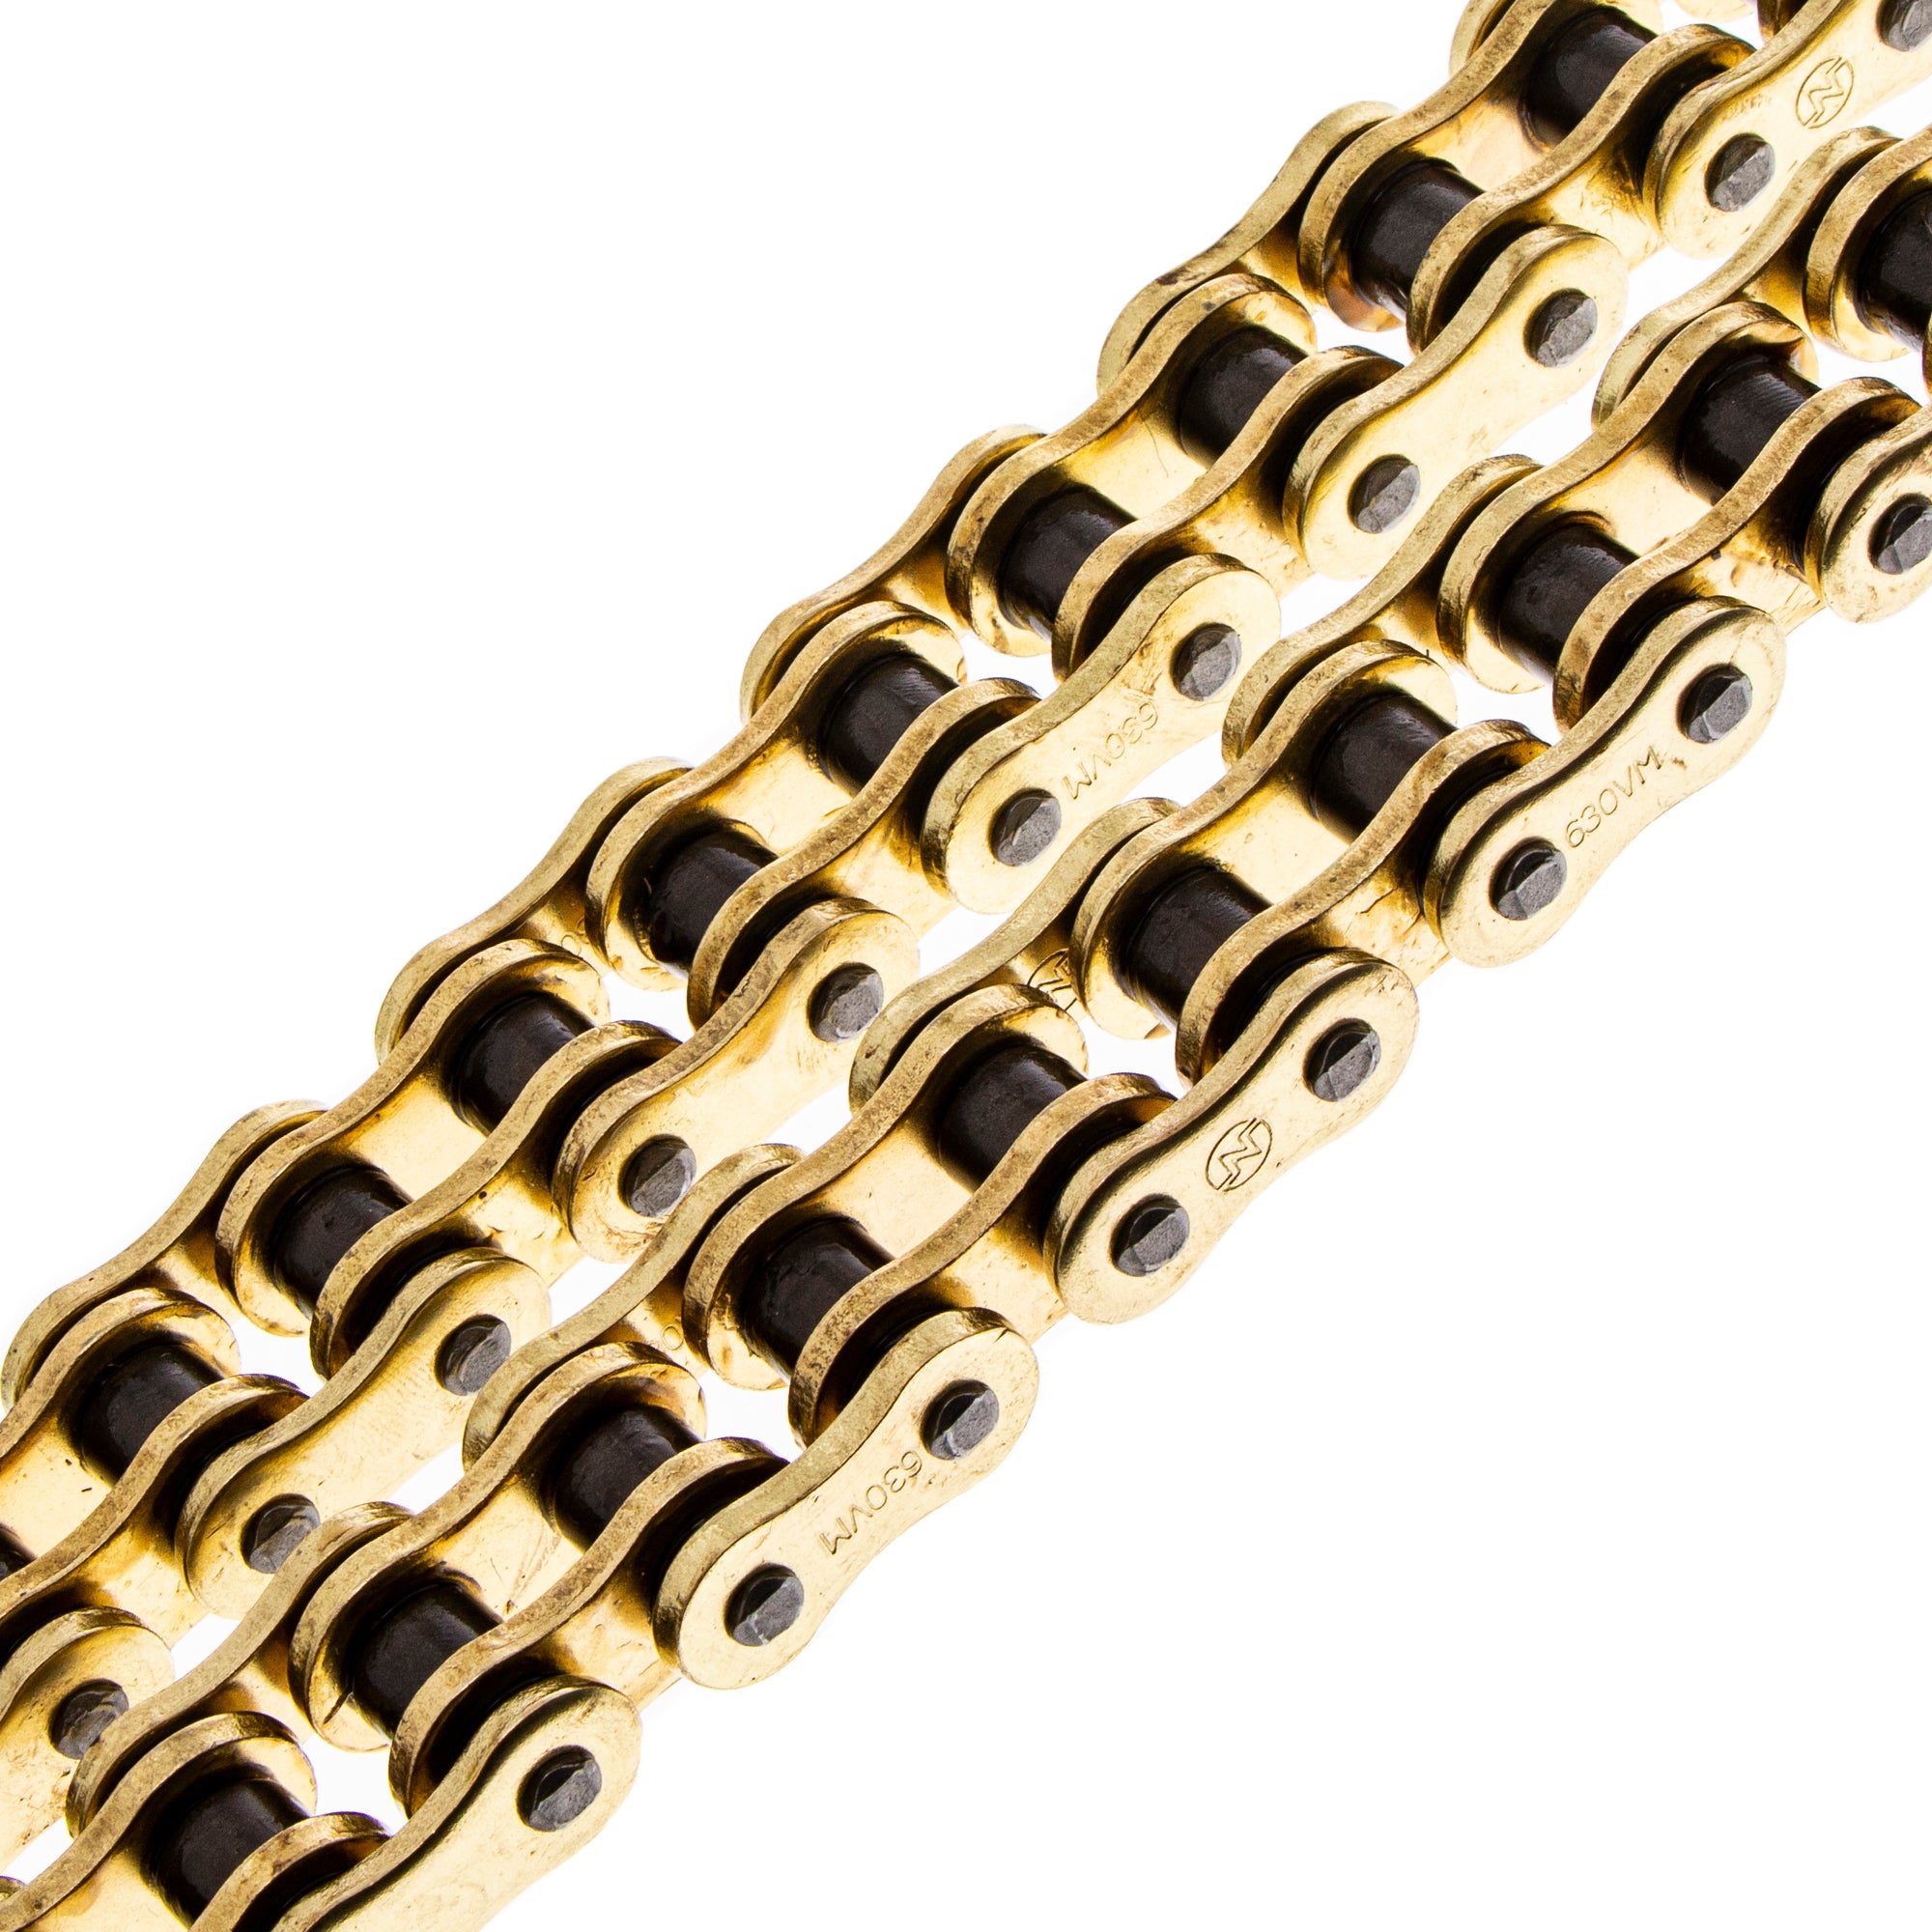 Gold X-Ring Chain 102 w/ Master Link for zOTHER GS1150ES3 27600-00A11 NICHE 519-CDC2519H